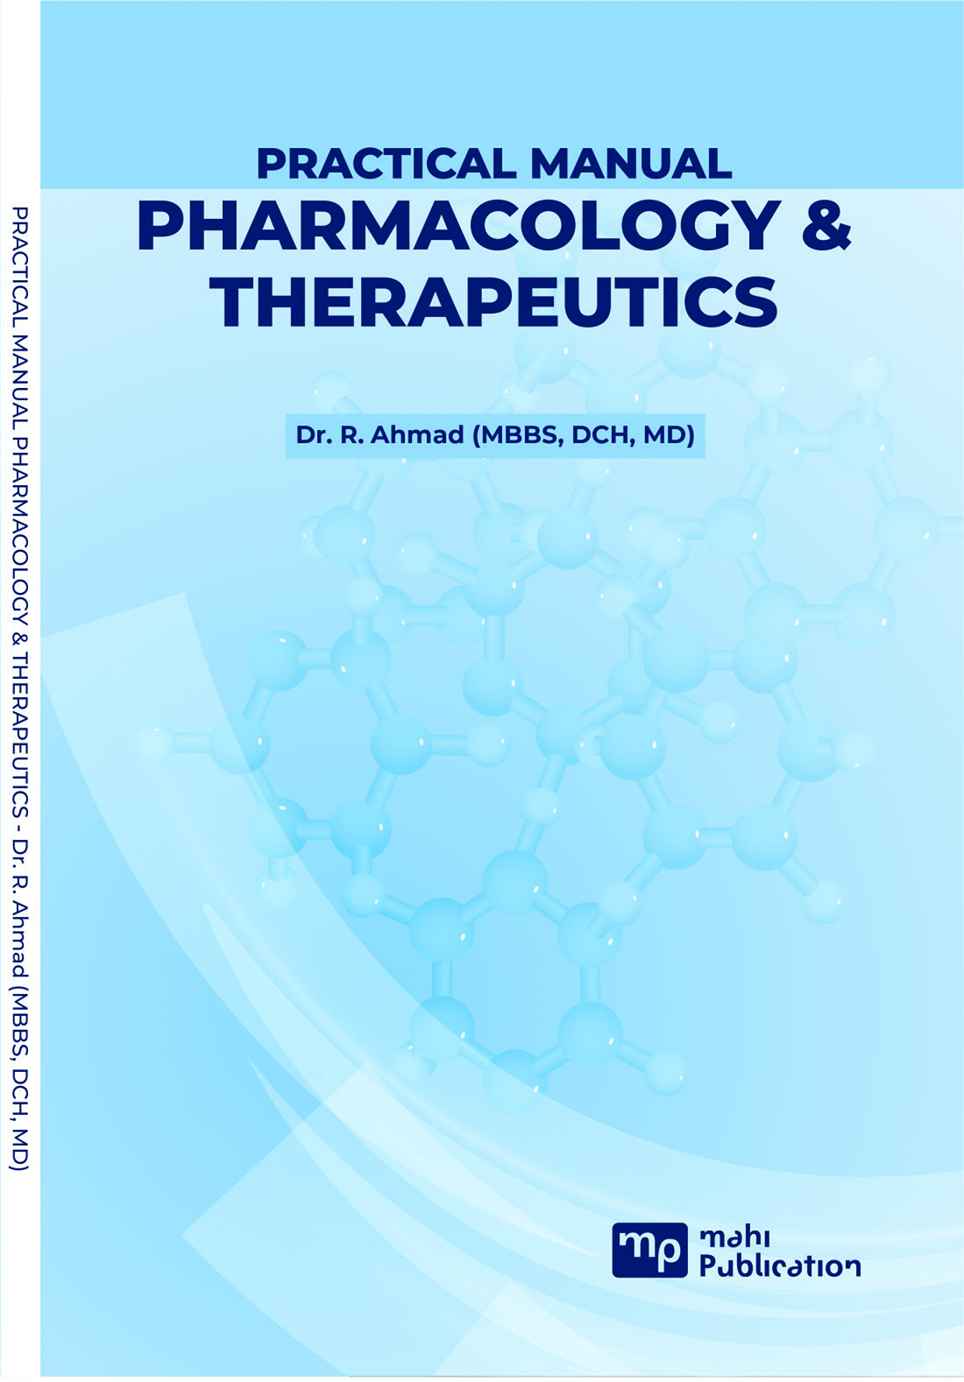 Practical Manual Pharmacology & Therapeutics